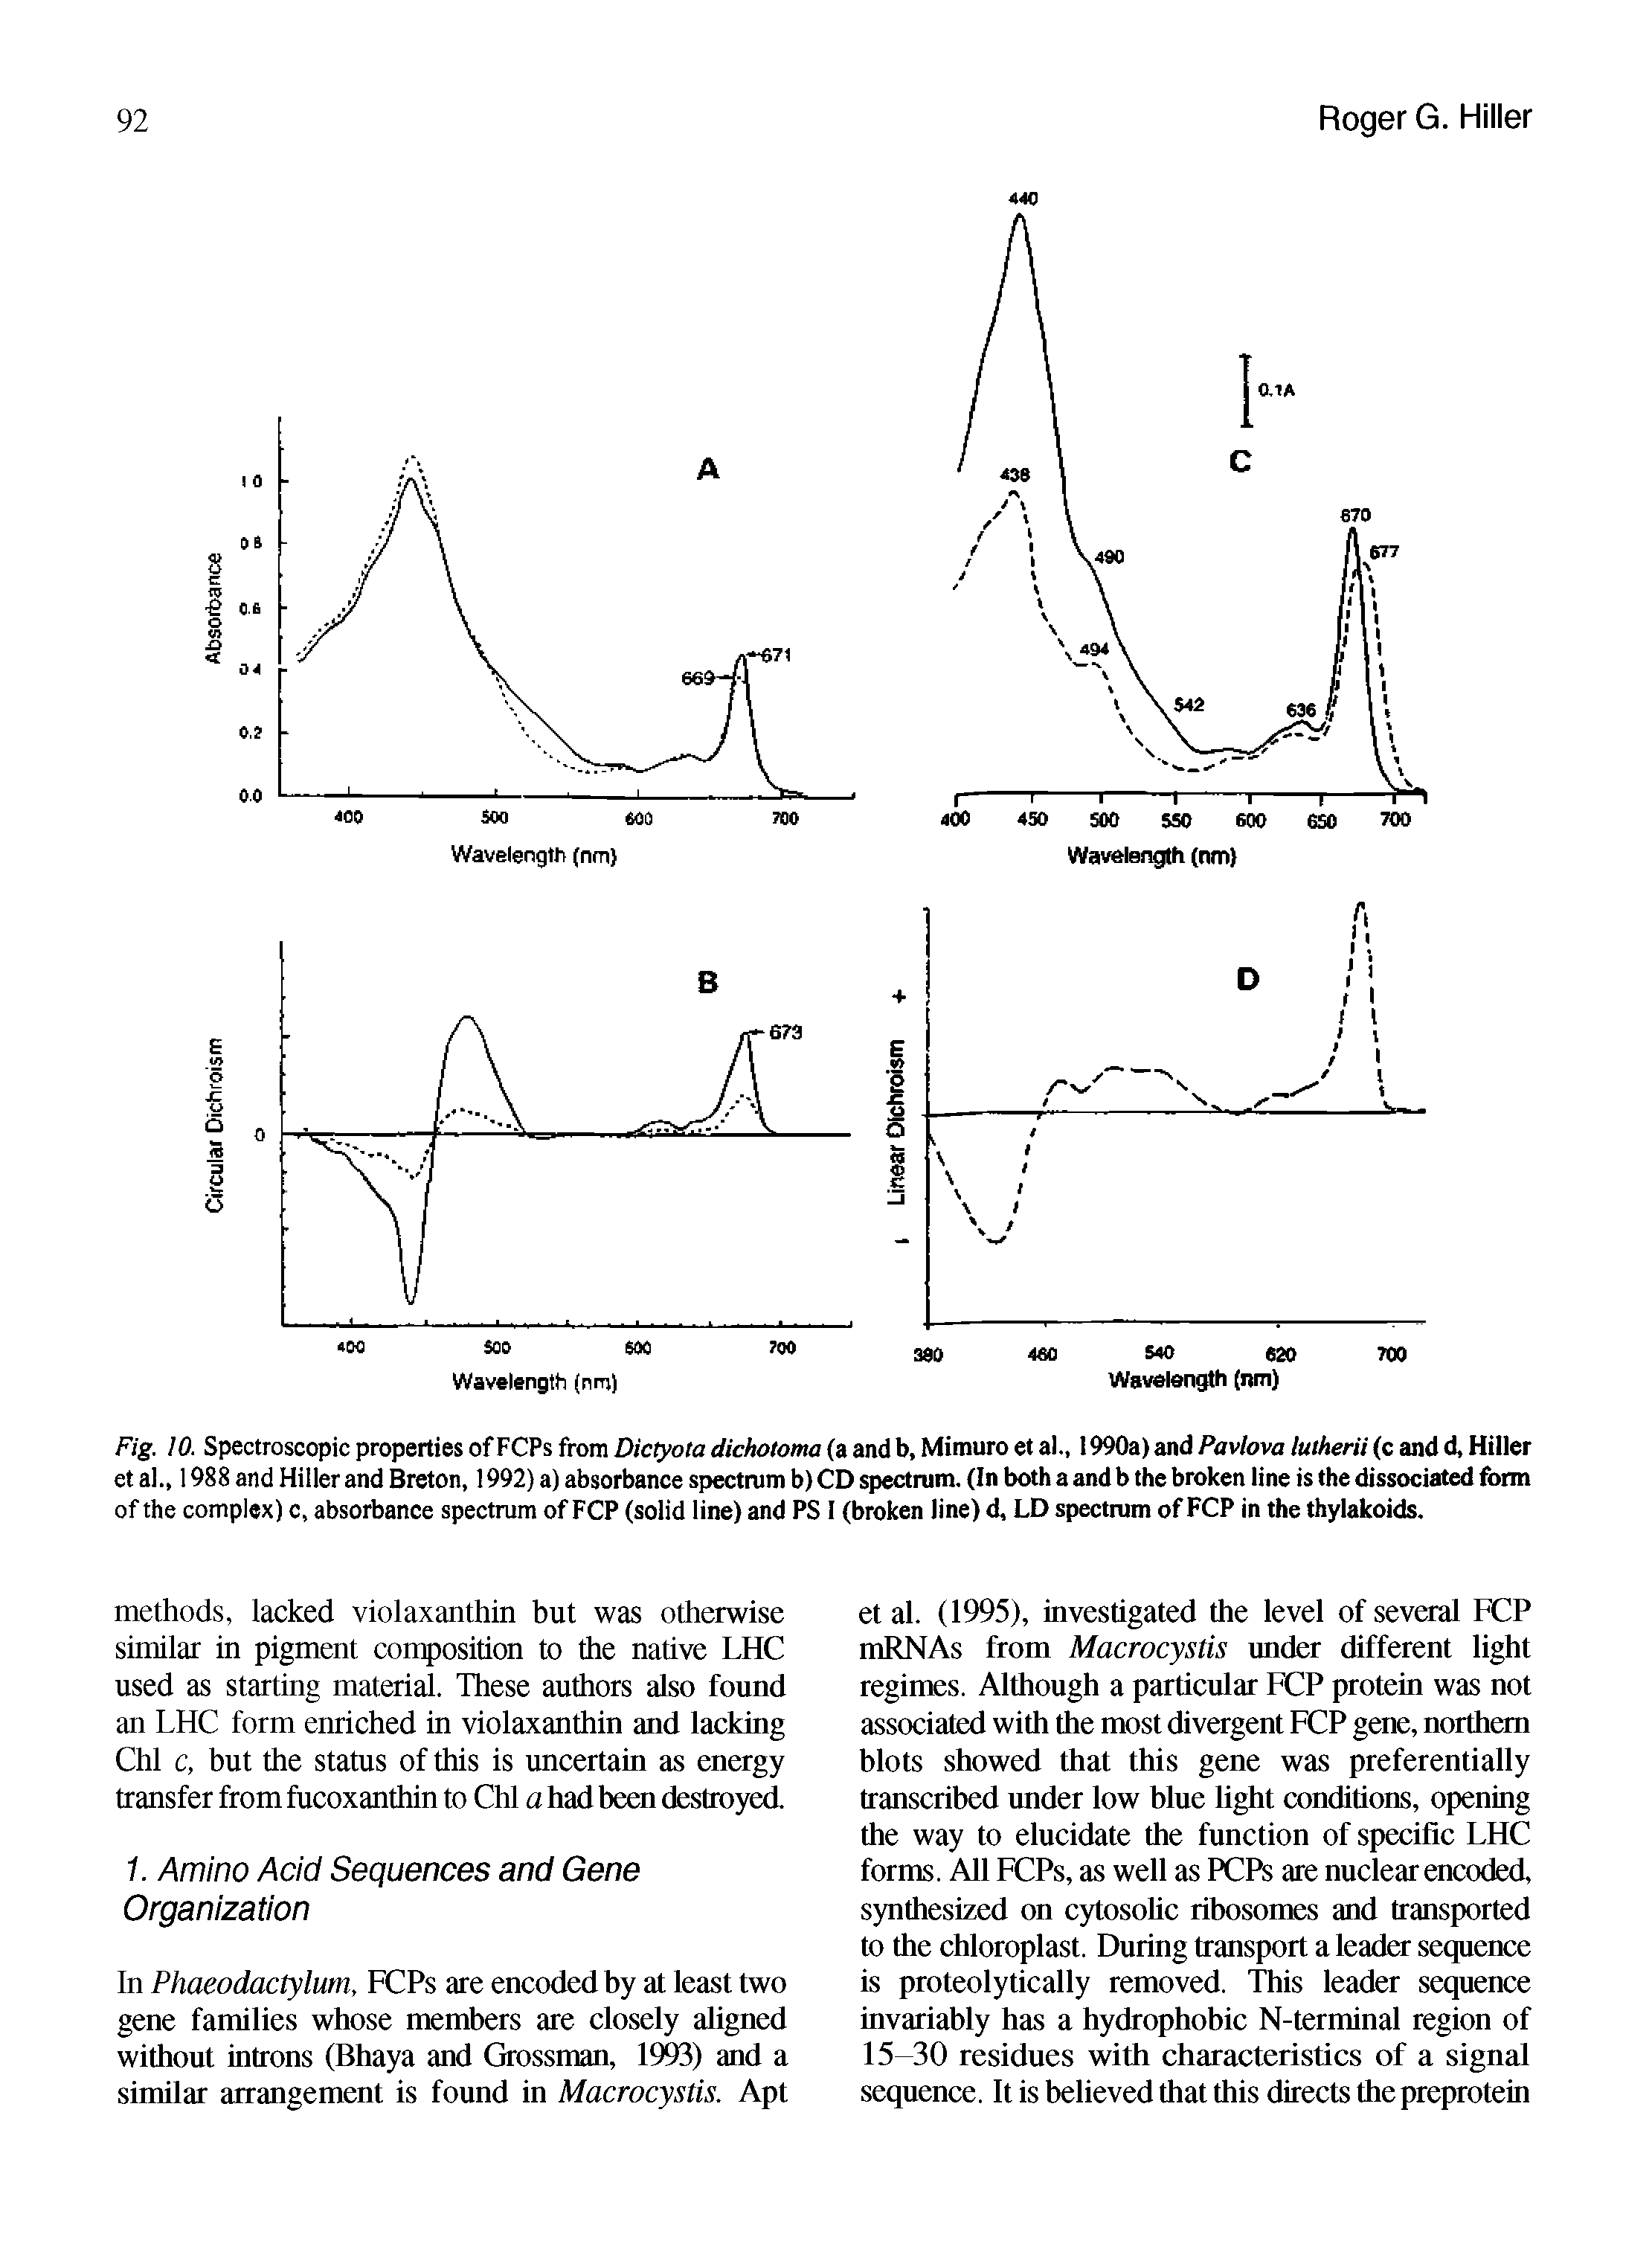 Fig. 10. Spectroscopic properties of FCPs from Dictyota dichotoma (a and b, Mimuro et al., 1990a) and Pavlova luiherii (c and d, Hiller et al., 1988 and Hiller and Breton, 1992) a) absorbance spectrum b) CD spectrum. (In both a and b the broken line is the dissociated form of the complex) c, absorbance spectrum of FCP (solid line) and PS I (broken line) d, LD spectrum of FCP in the thylakoids.